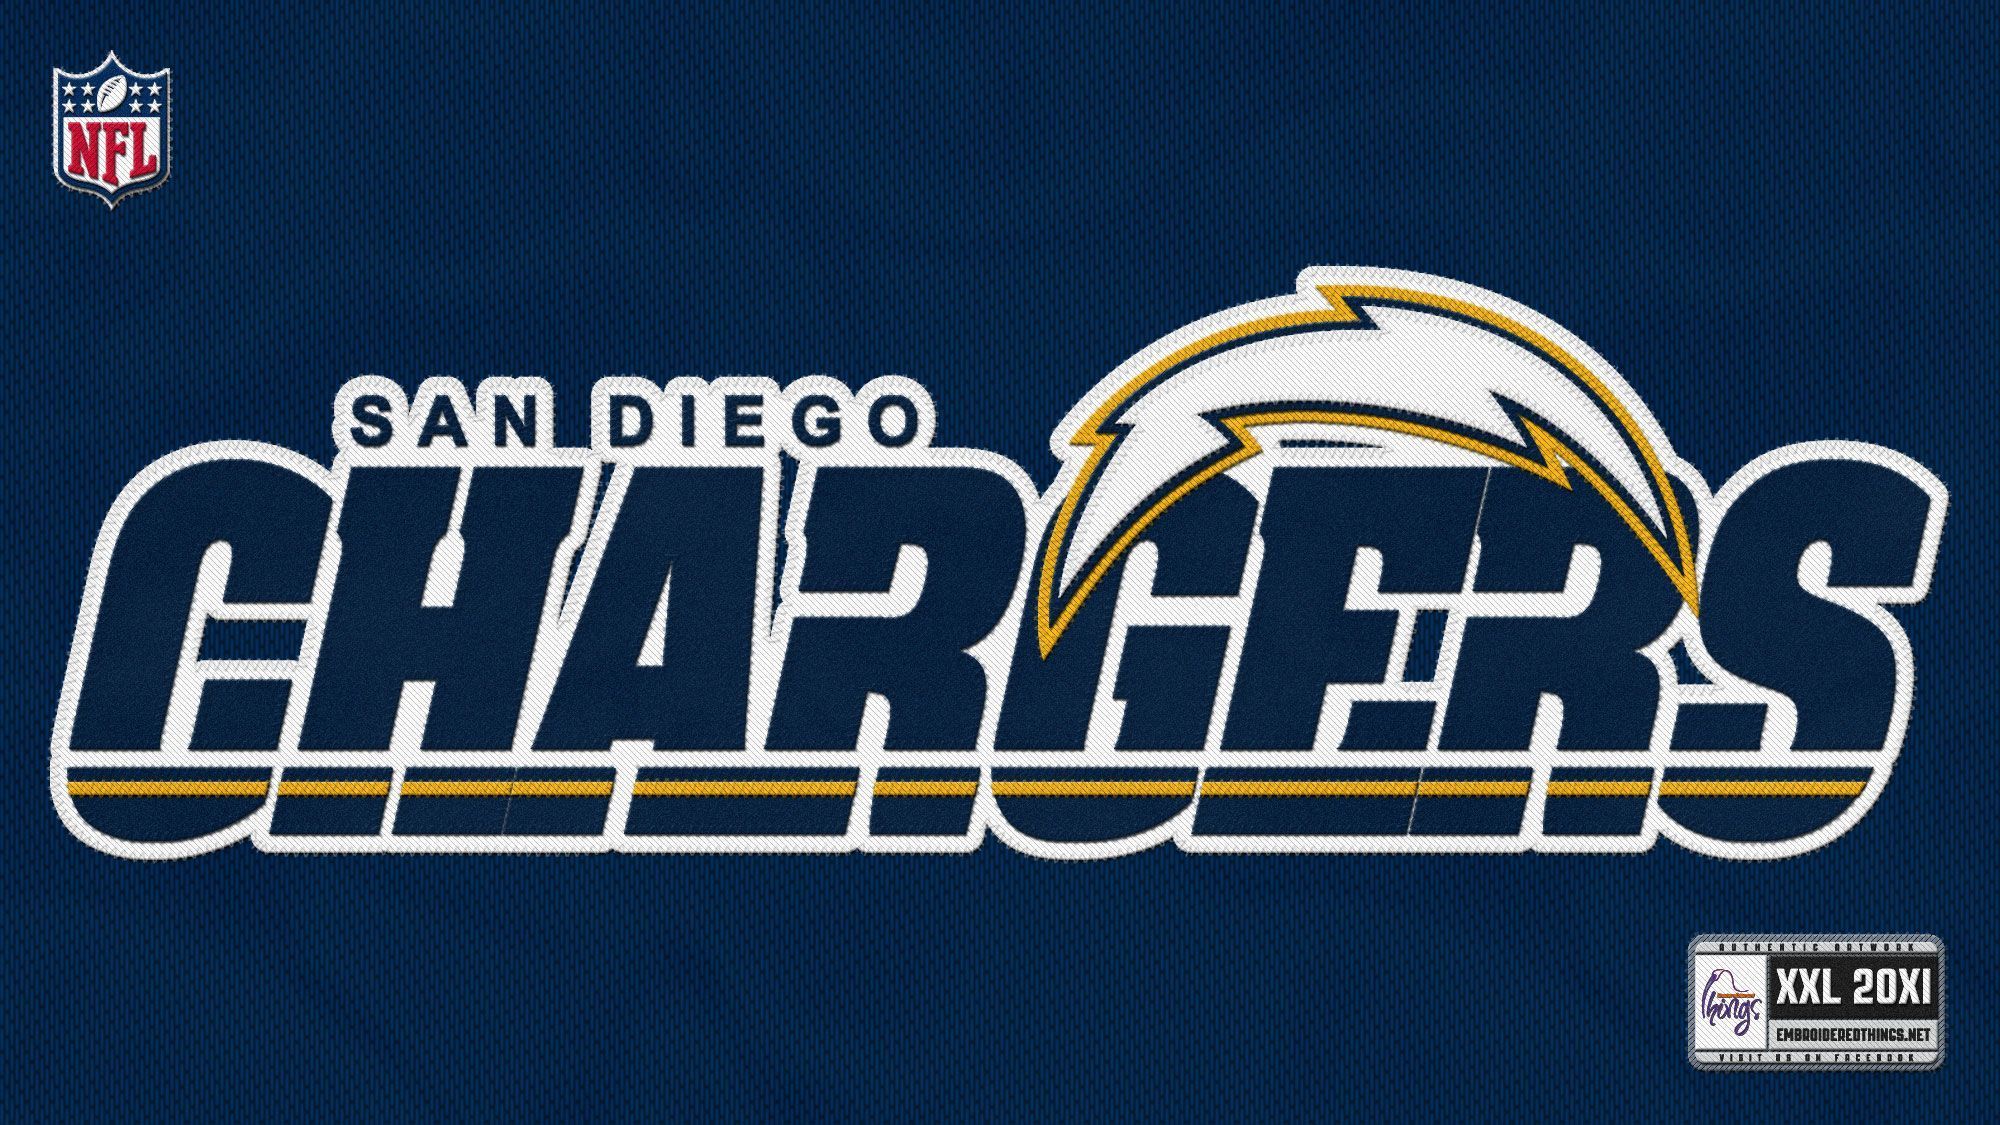 San Diego Chargers Wallpaper 001 001 - HDWallpaperSets.Com